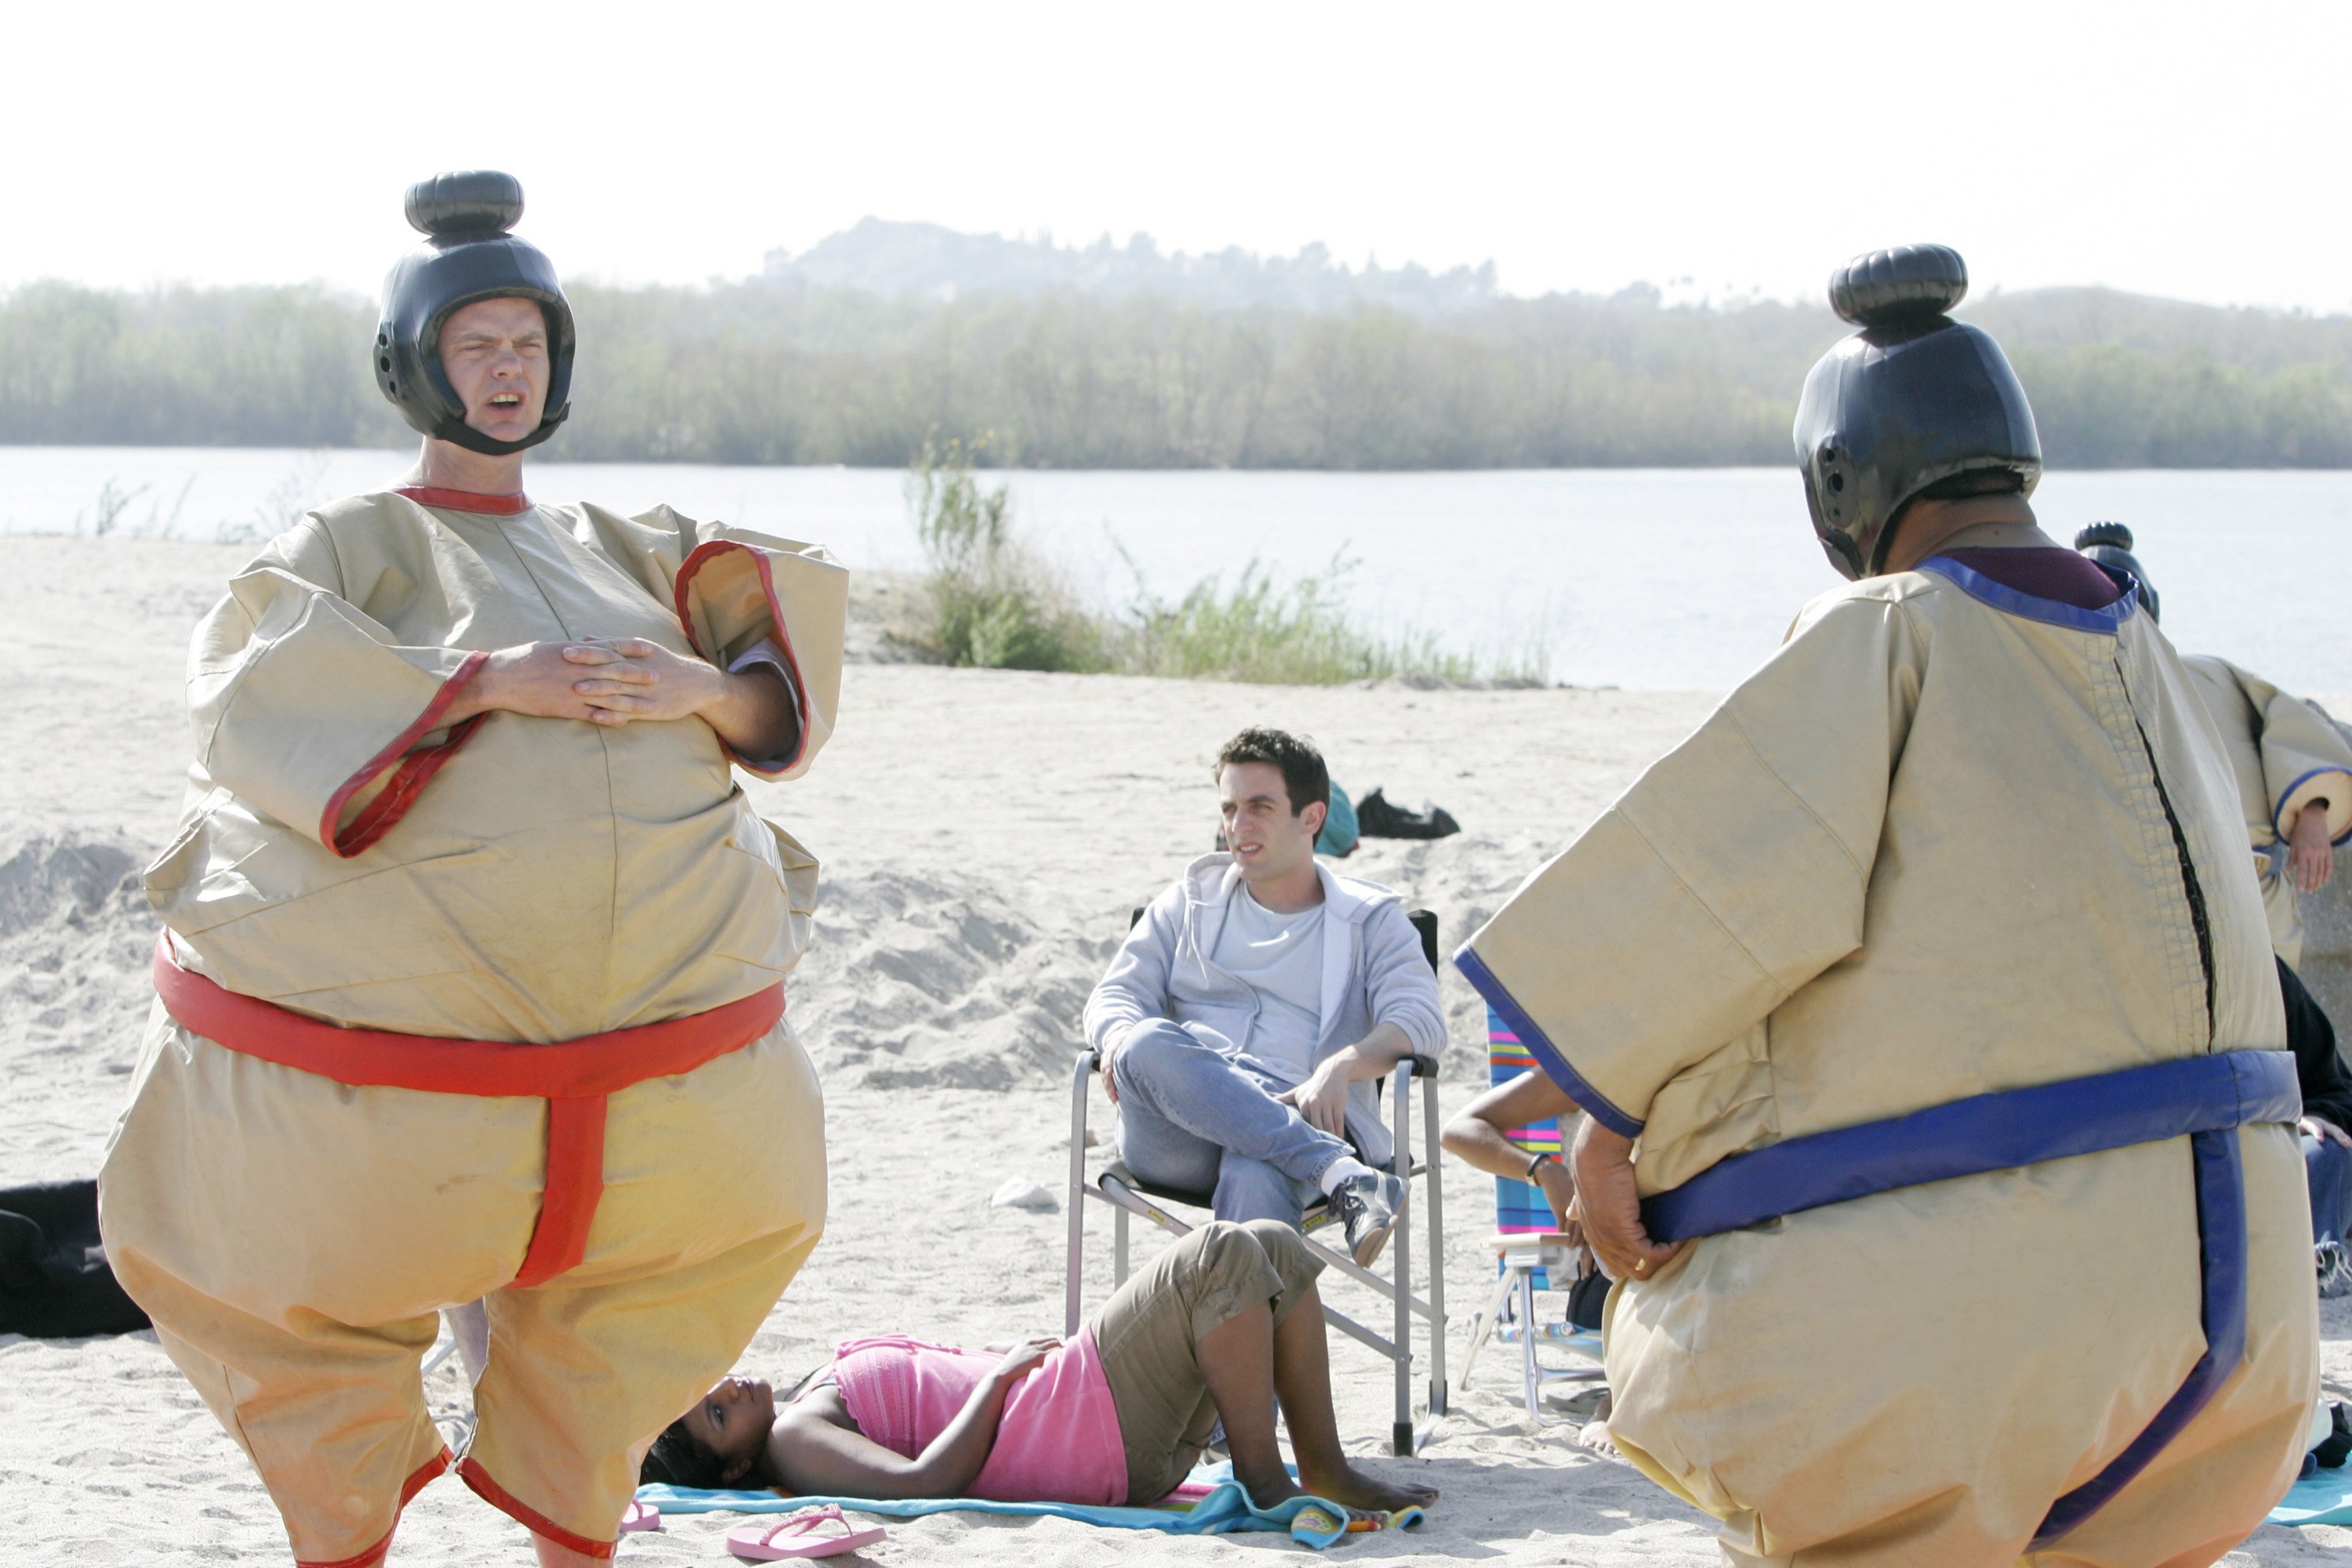 Rainn Wilson as Dwight Schrute and Leslie David Baker as Stanley Hudson wearing sumo costumes in 'The Office' episode 'Beach Games'